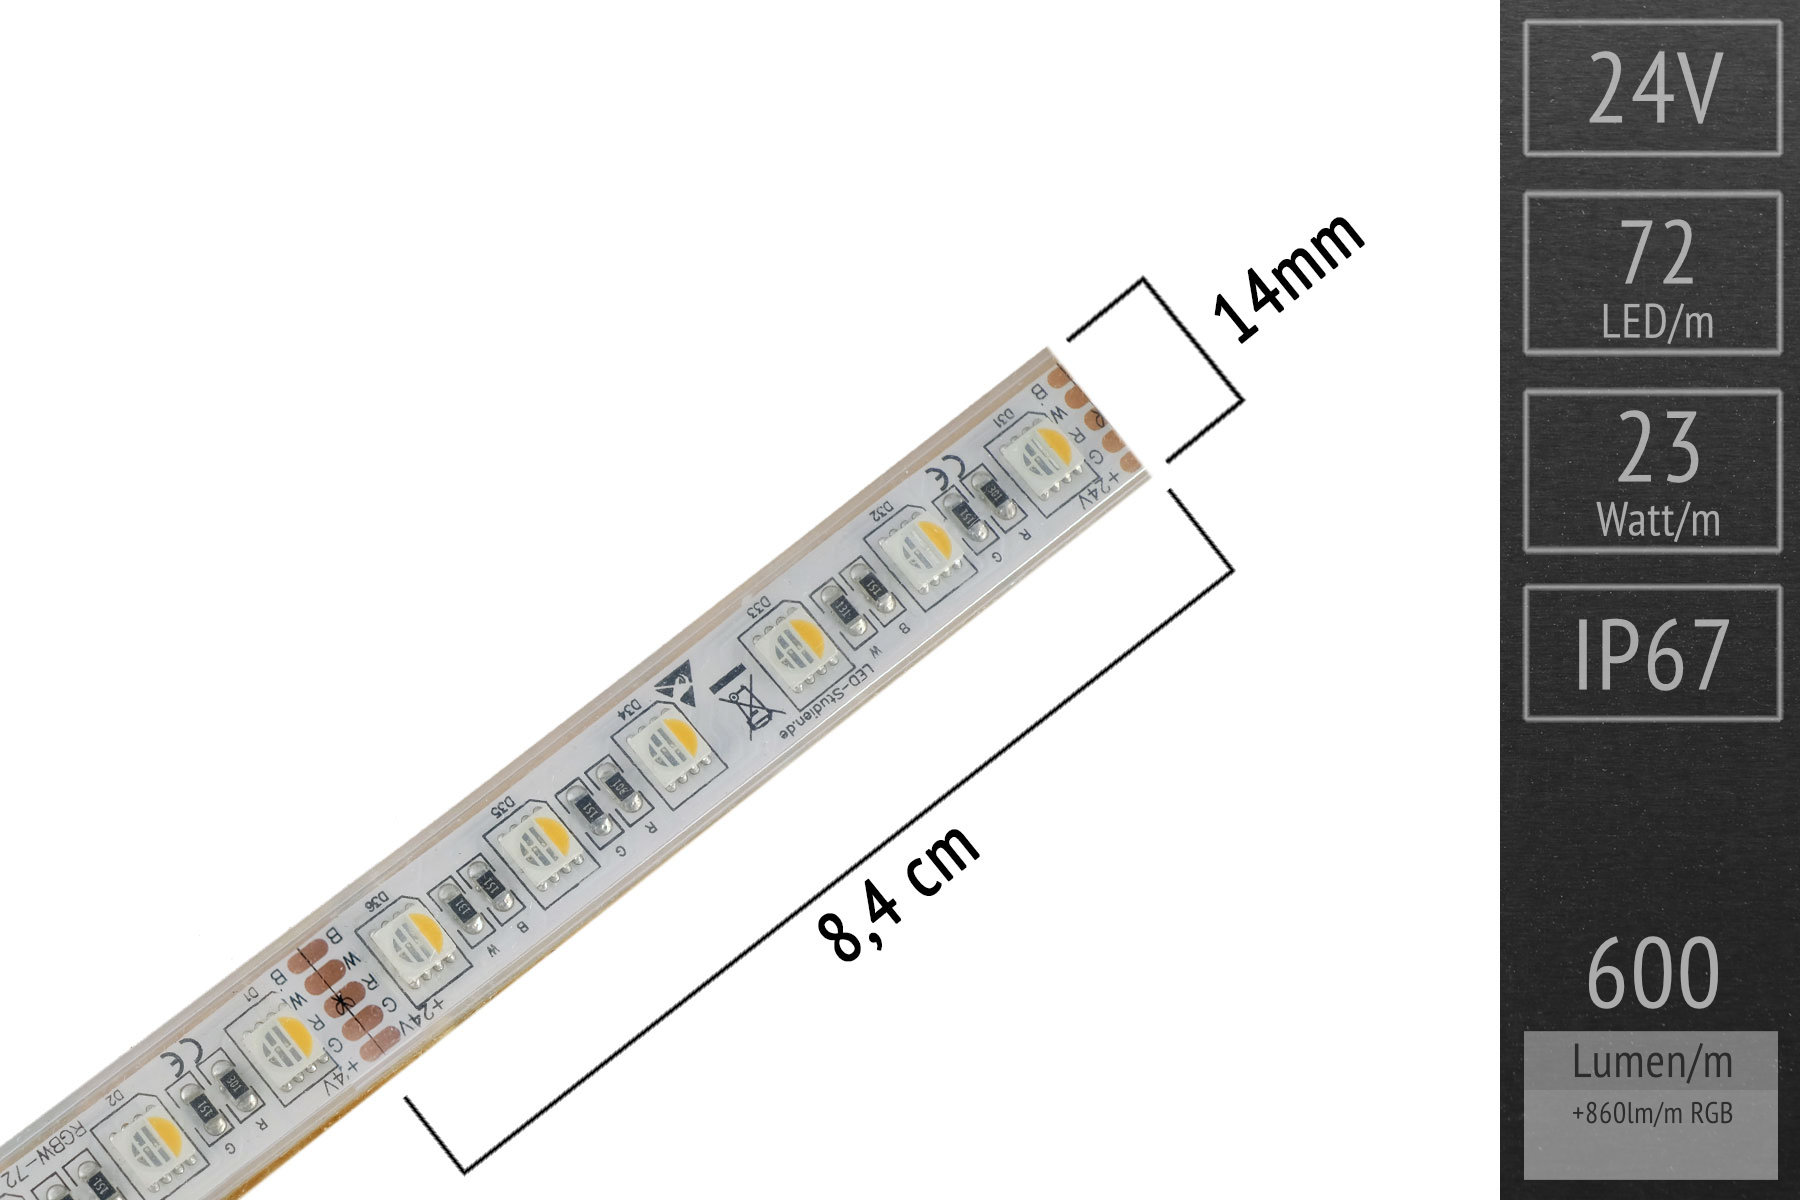 RGBWW 4in1 in silicone tube: 72 LEDs/m - IP67 - 14mm wide